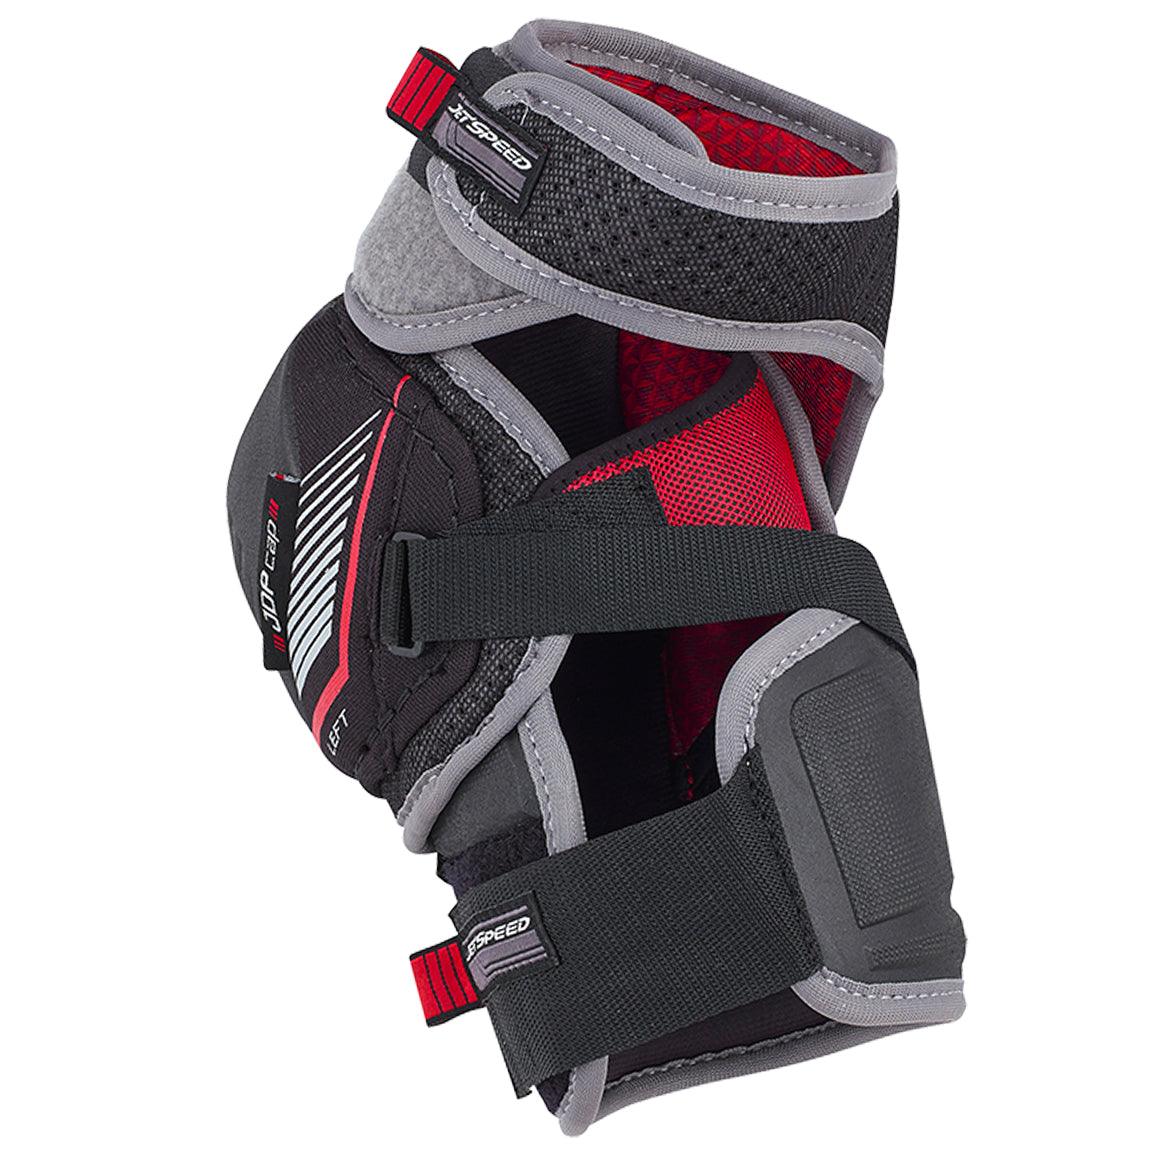 JetSpeed FT390 Elbow Pads - Junior - Sports Excellence